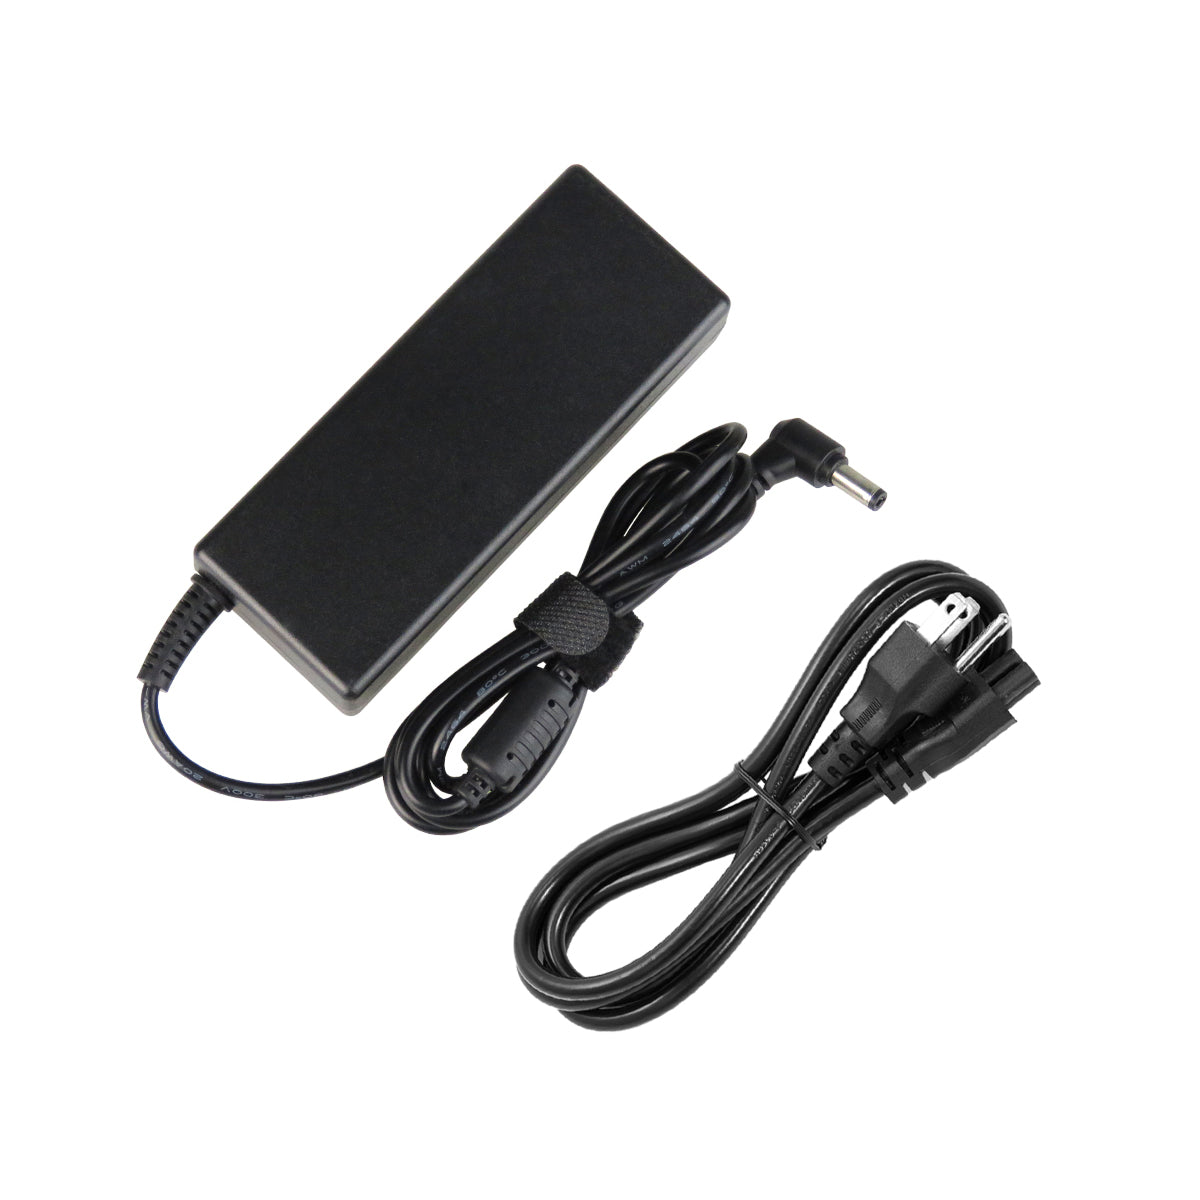 AC Adapter Charger for Gateway S-7200 Notebook.